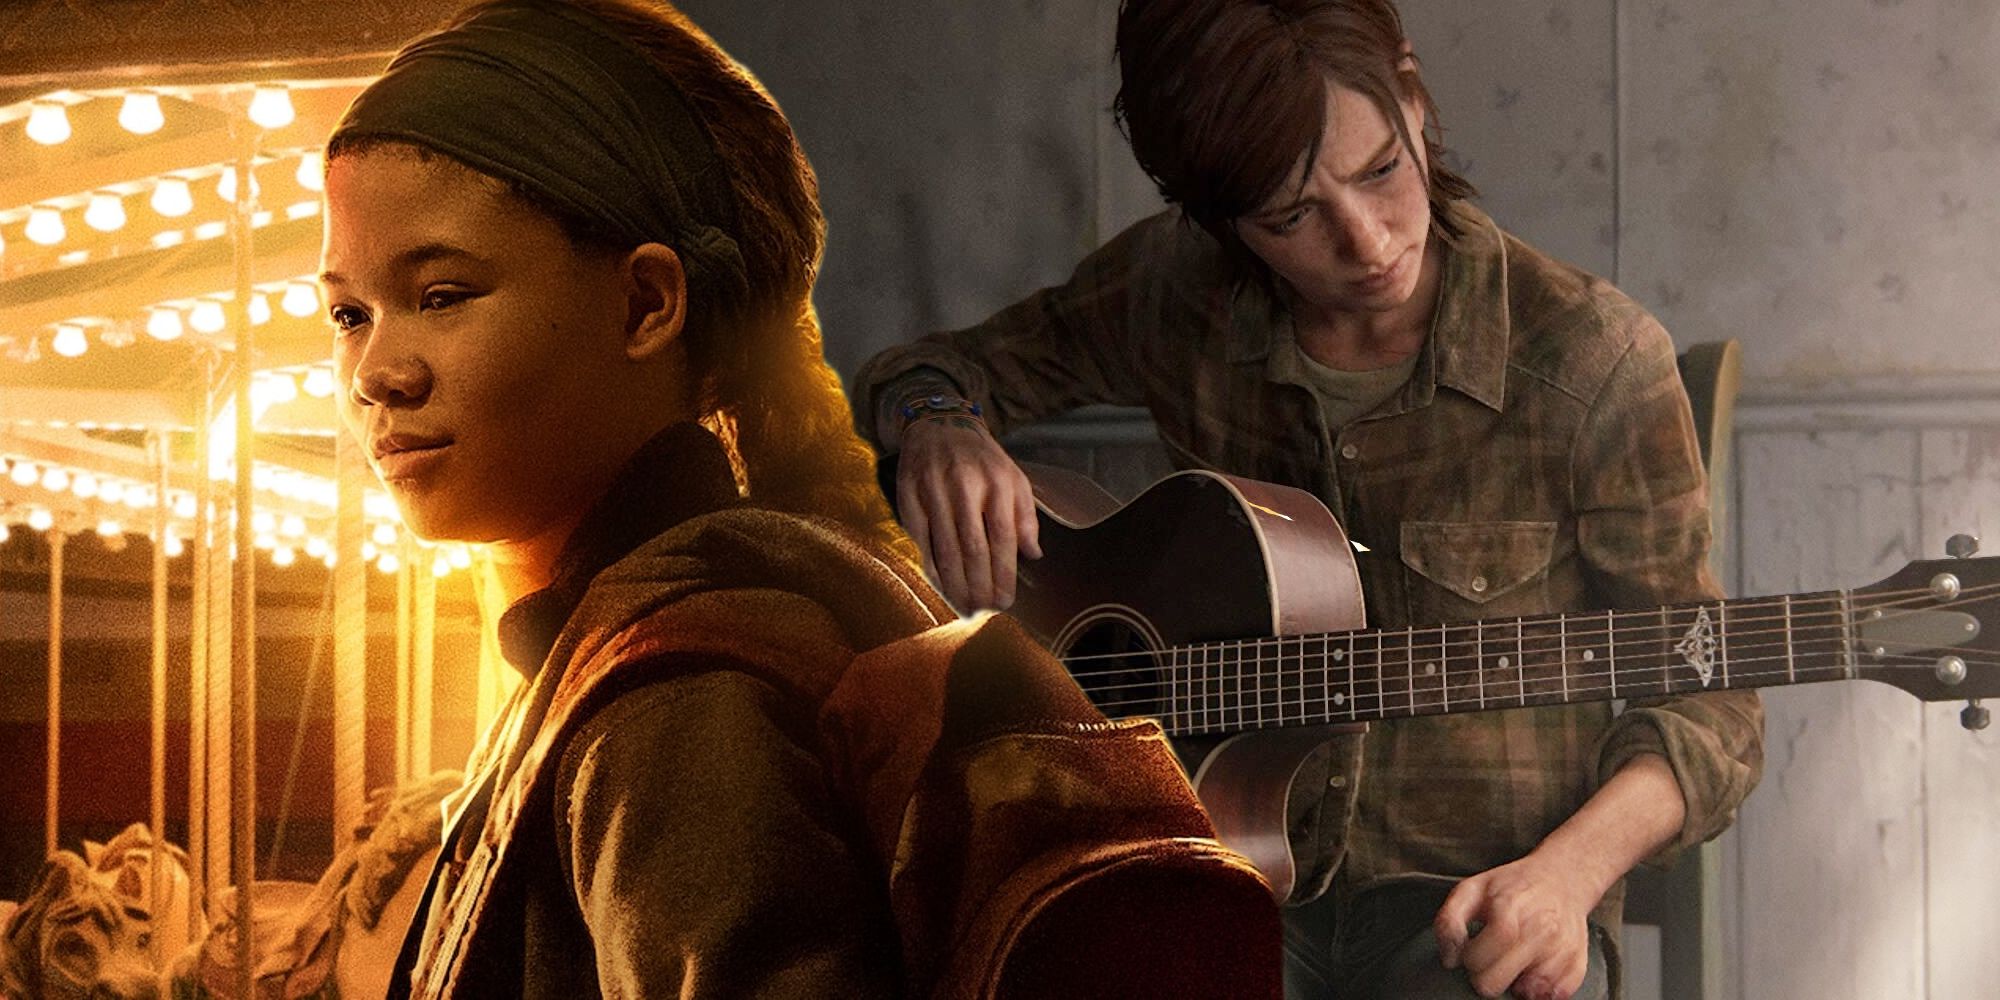 Ellie playing guitar in Last of Us Part II and Riley in Last of Us character poster